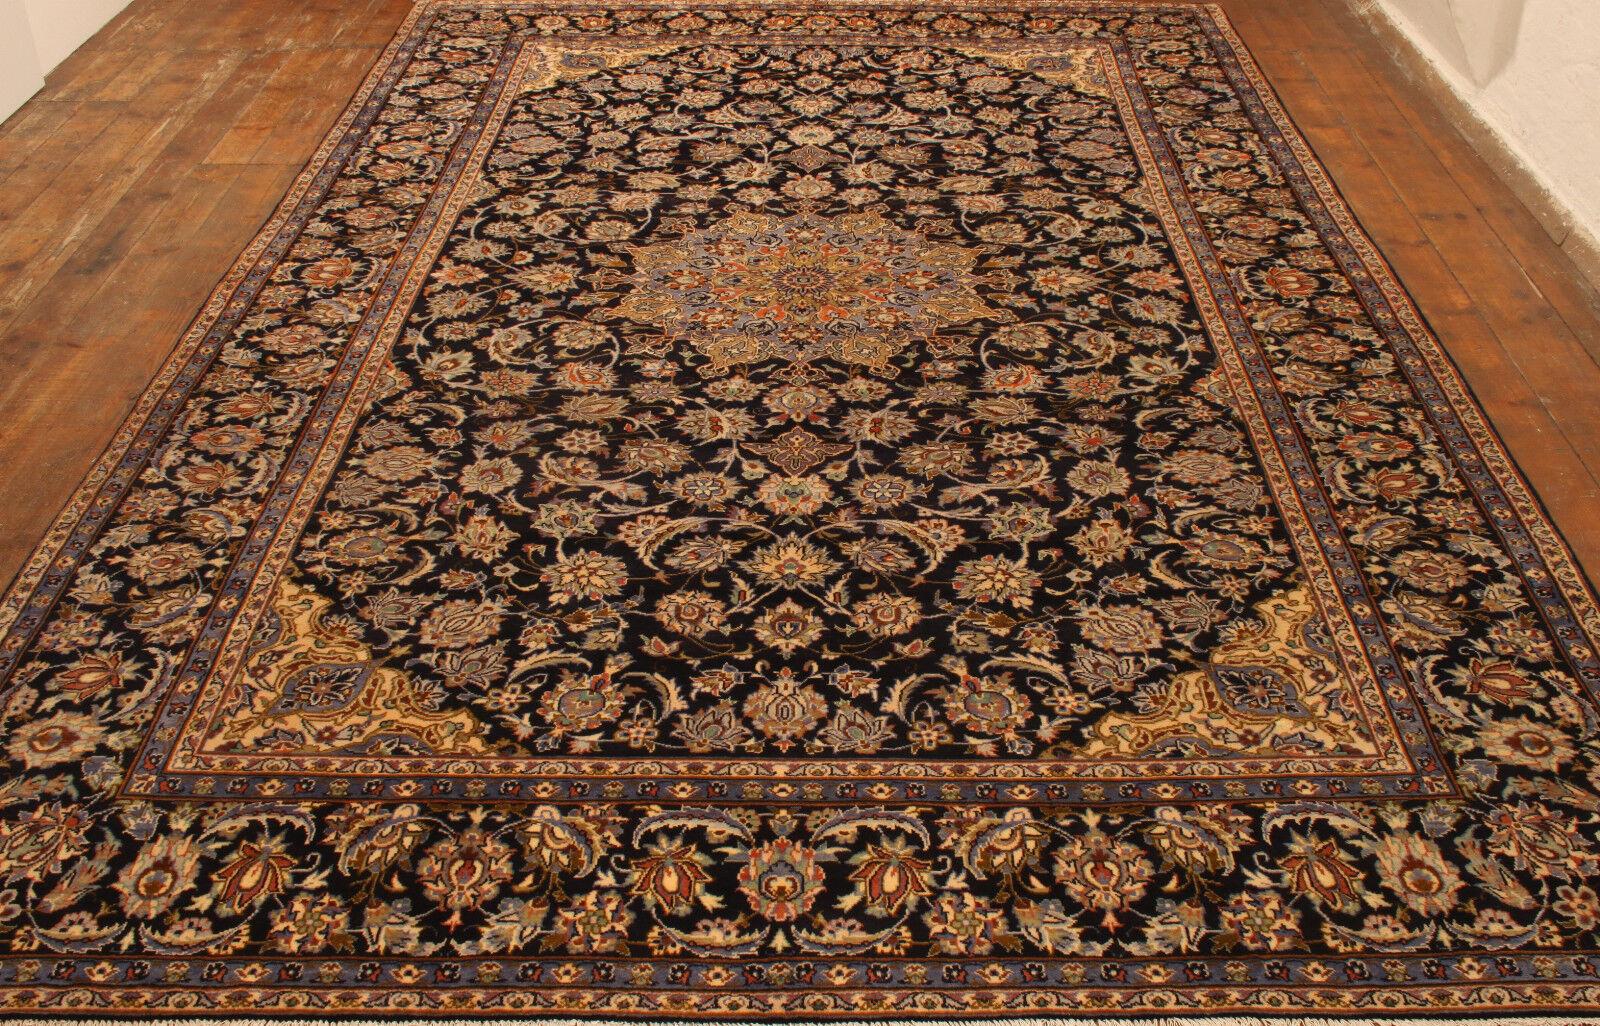 Handmade Vintage Persian Style Tabriz Rug (290cm x 442cm / 9.51ft x 14.50ft)

Immerse yourself in the opulence of our Handmade Vintage Persian Style Tabriz Rug. Dating back to the 1970s, this high-quality woolen rug measures an expansive 290cm x